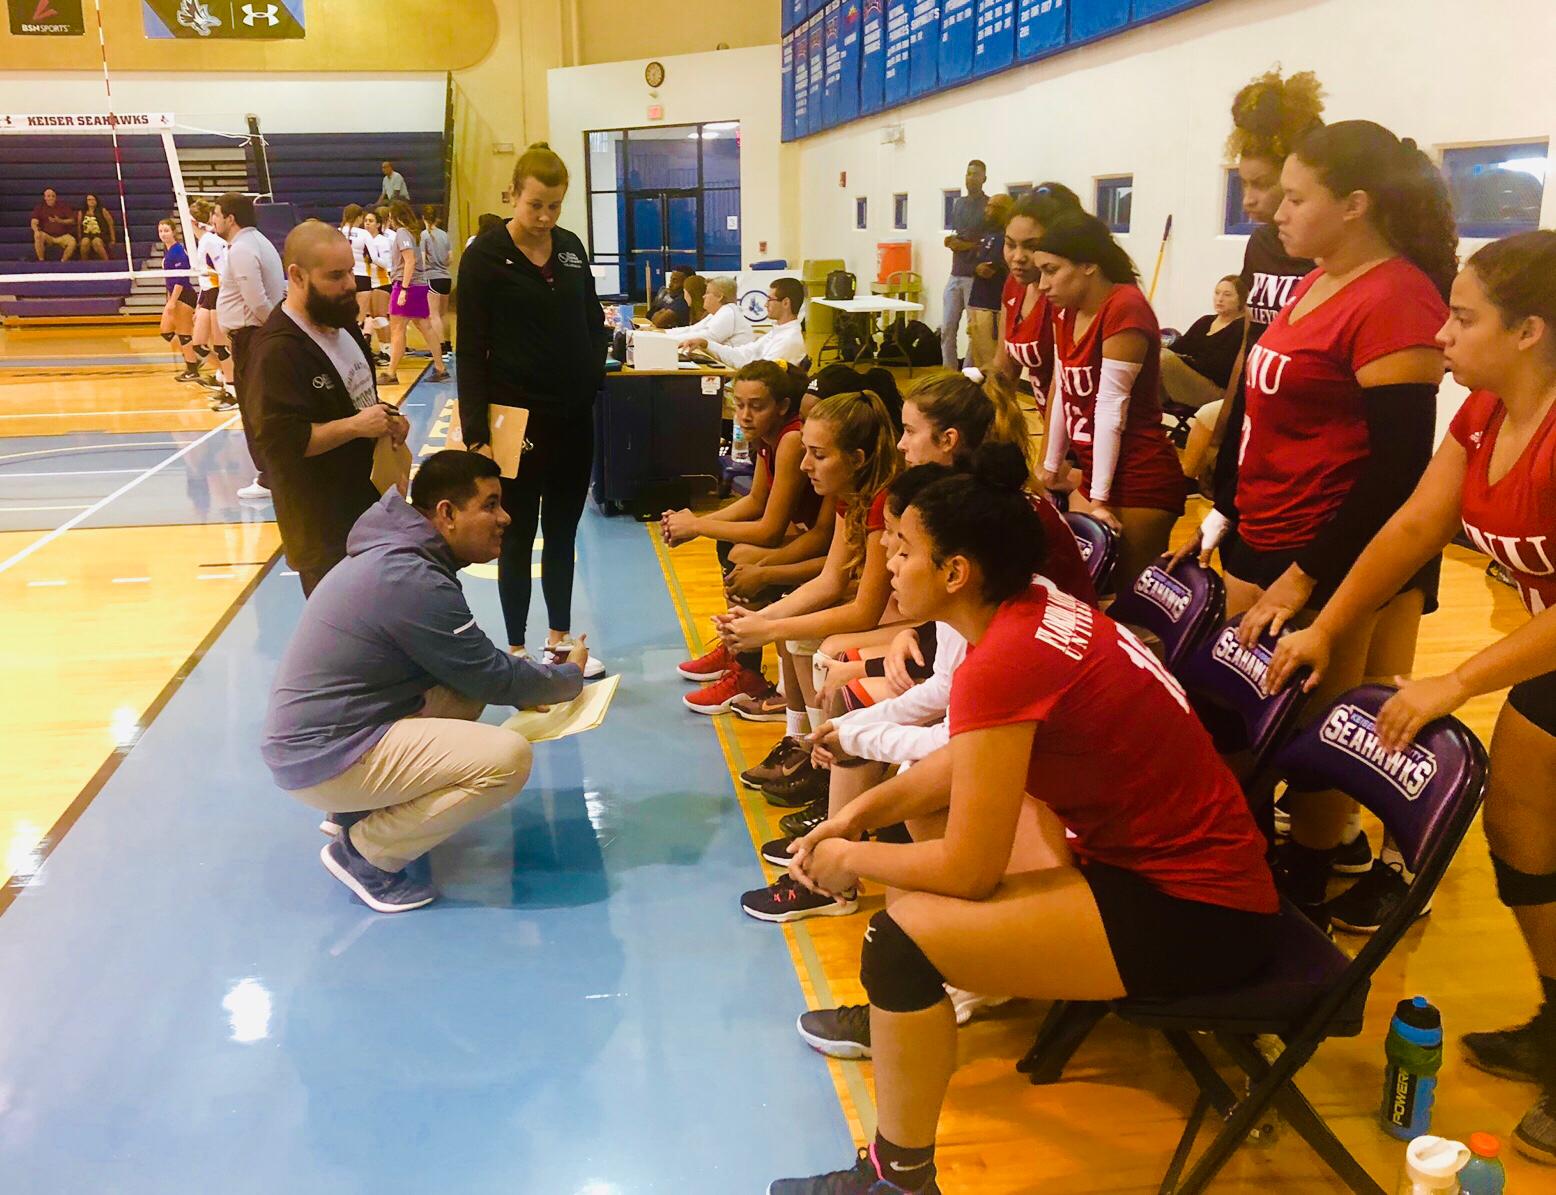 FNU Volleybal Coach Talking to the players during timeout